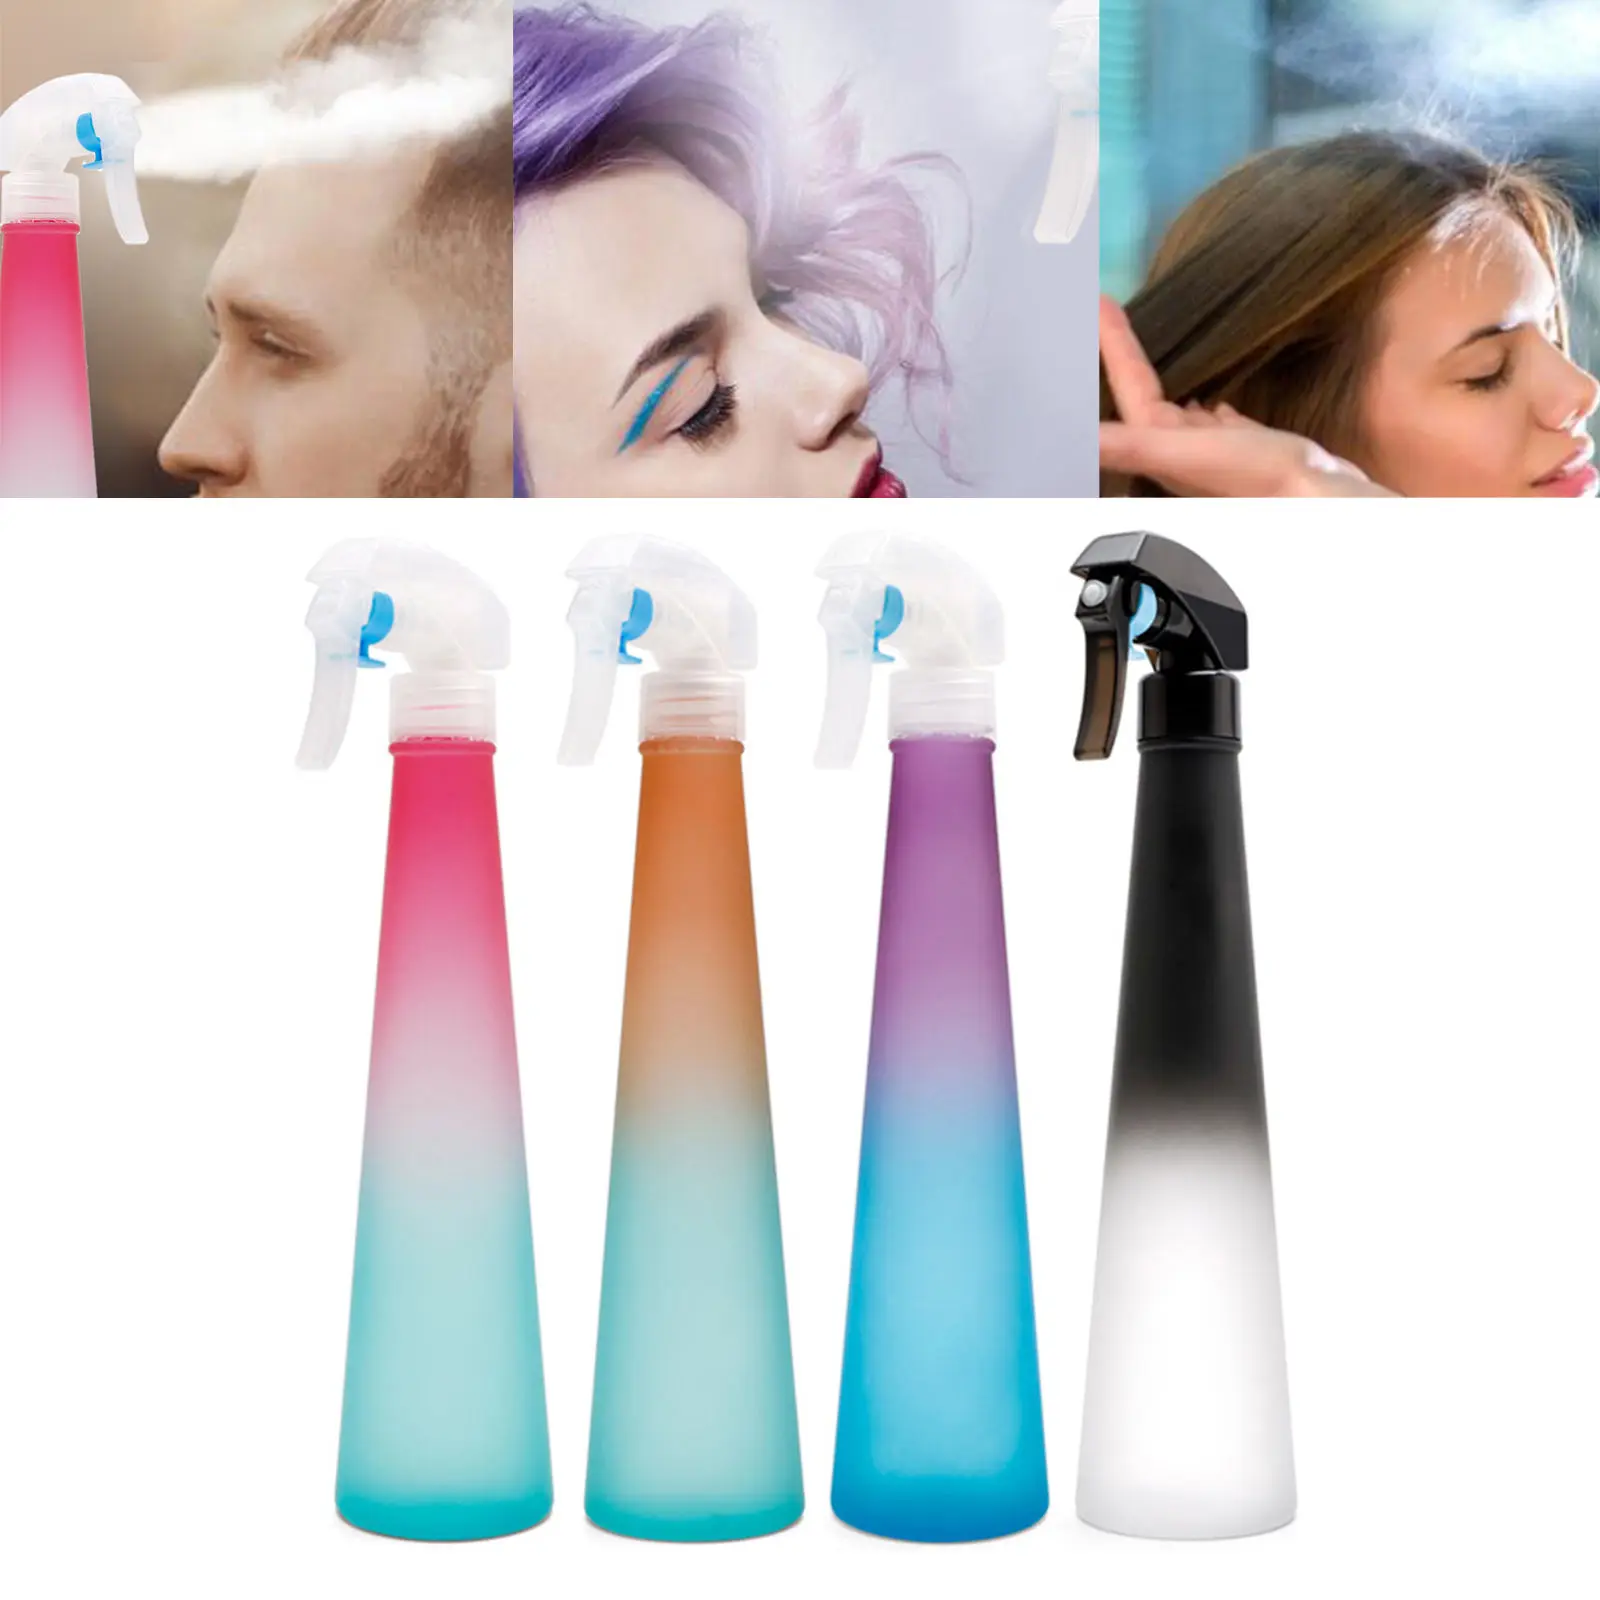 Stylish Hairdressing Spray Bottle Refillable Beauty for Salon Hair Care Curling Gardening Pets Girls Boy Travel Hotel Office